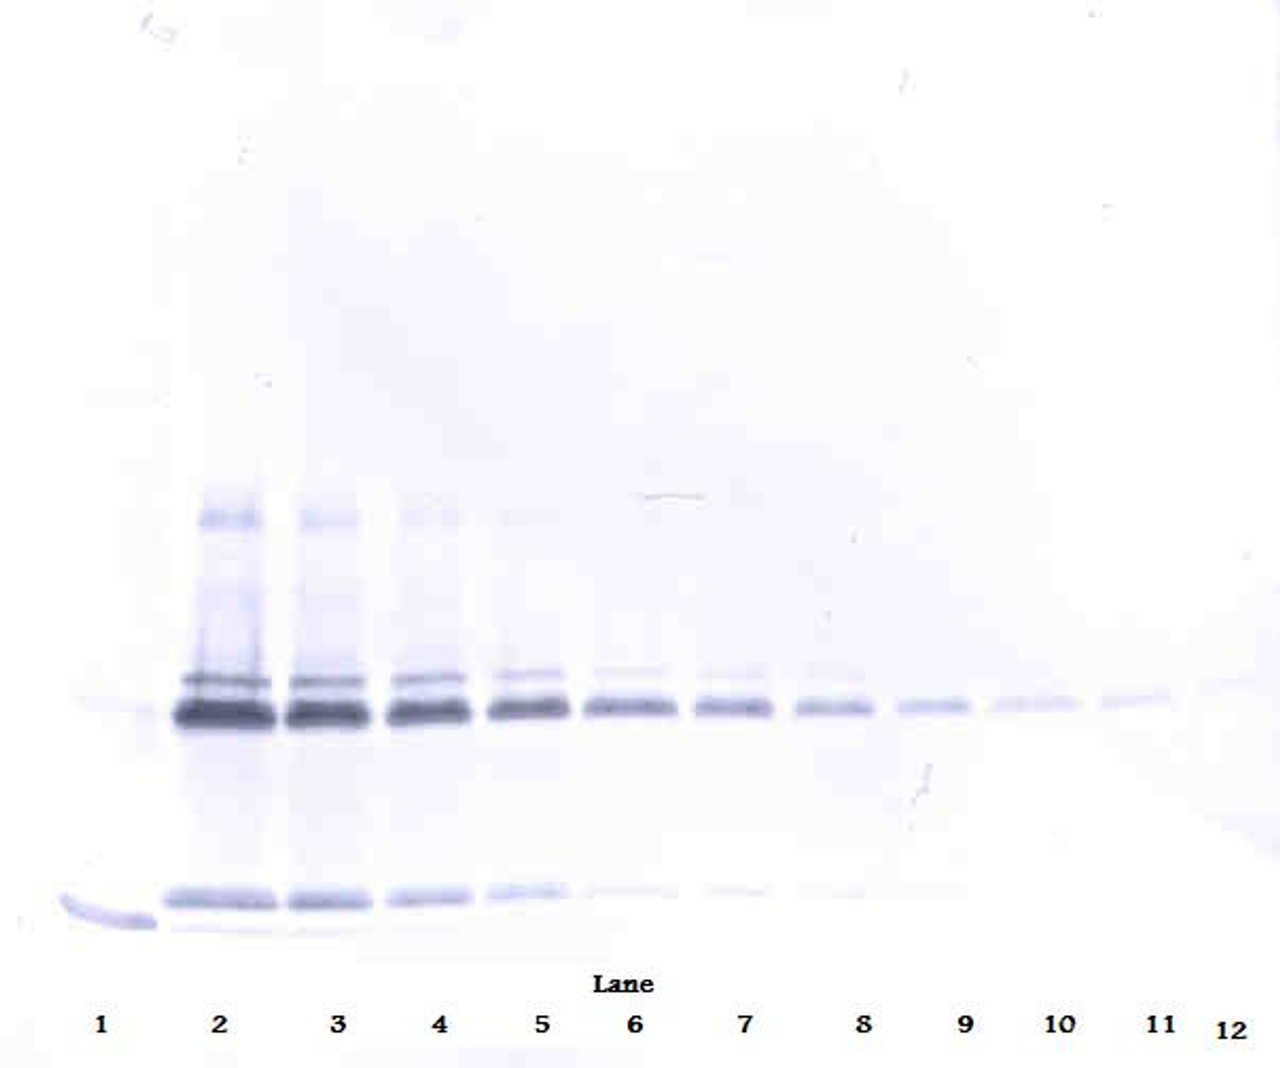 To detect hIL-17A by Western Blot analysis this antibody can be used at a concentration of 0.1 - 0.2 ug/ml. Used in conjunction with compatible secondary reagents the detection limit for recombinant hIL-17A is 1.5 - 3.0 ng/lane, under either reducing or non-reducing conditions.